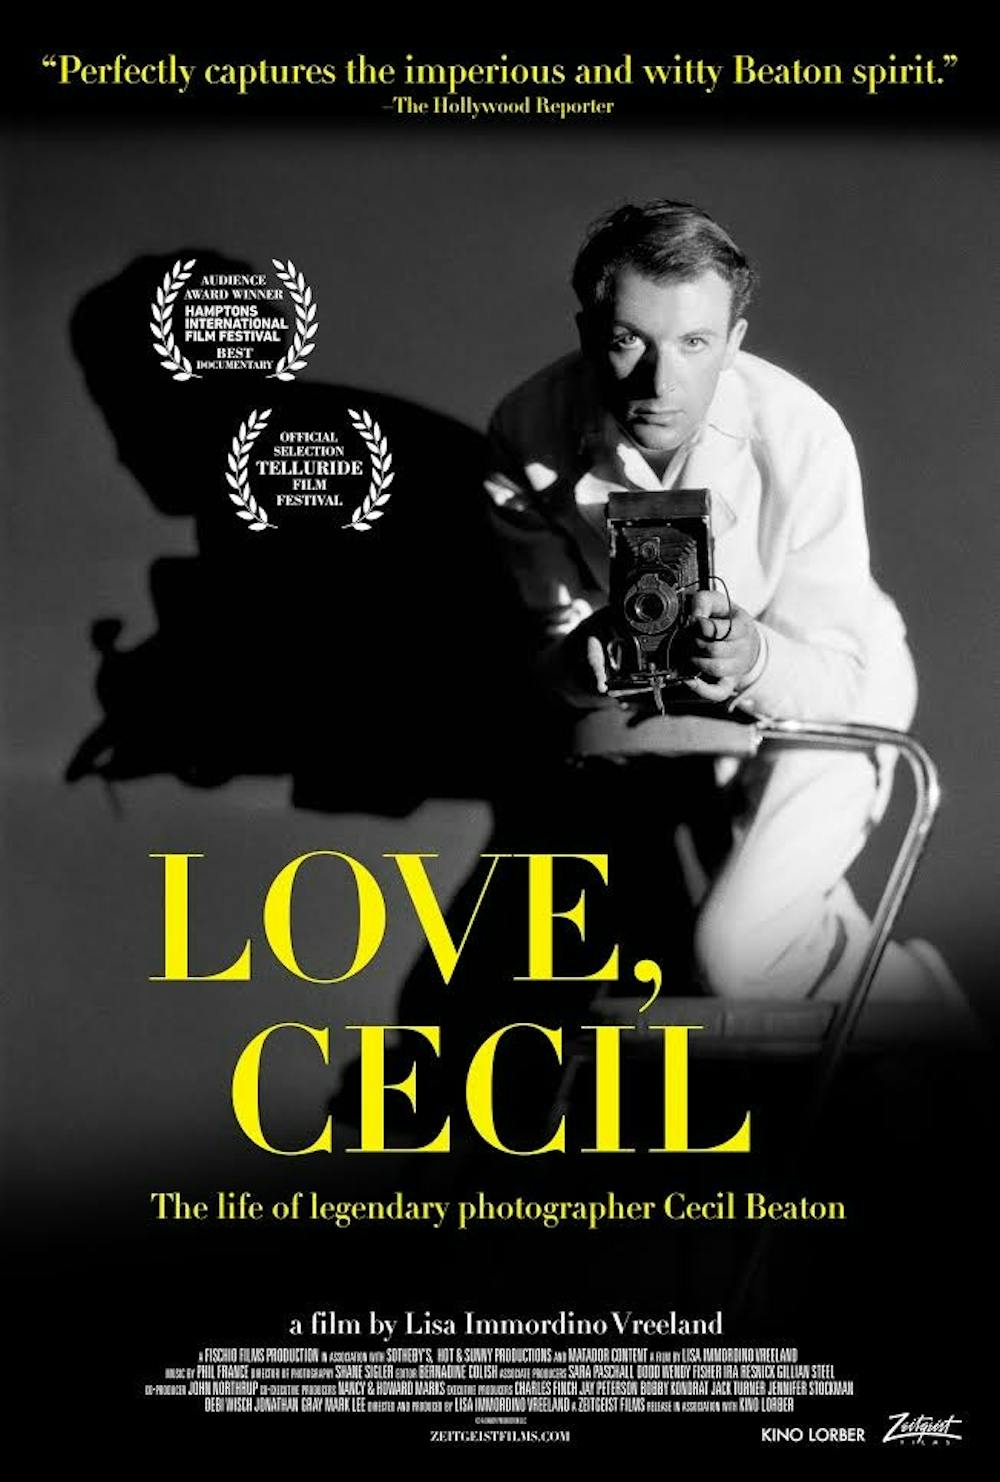 “Love, Cecil” a deep dive into artist who attempted to sculpt extravagance